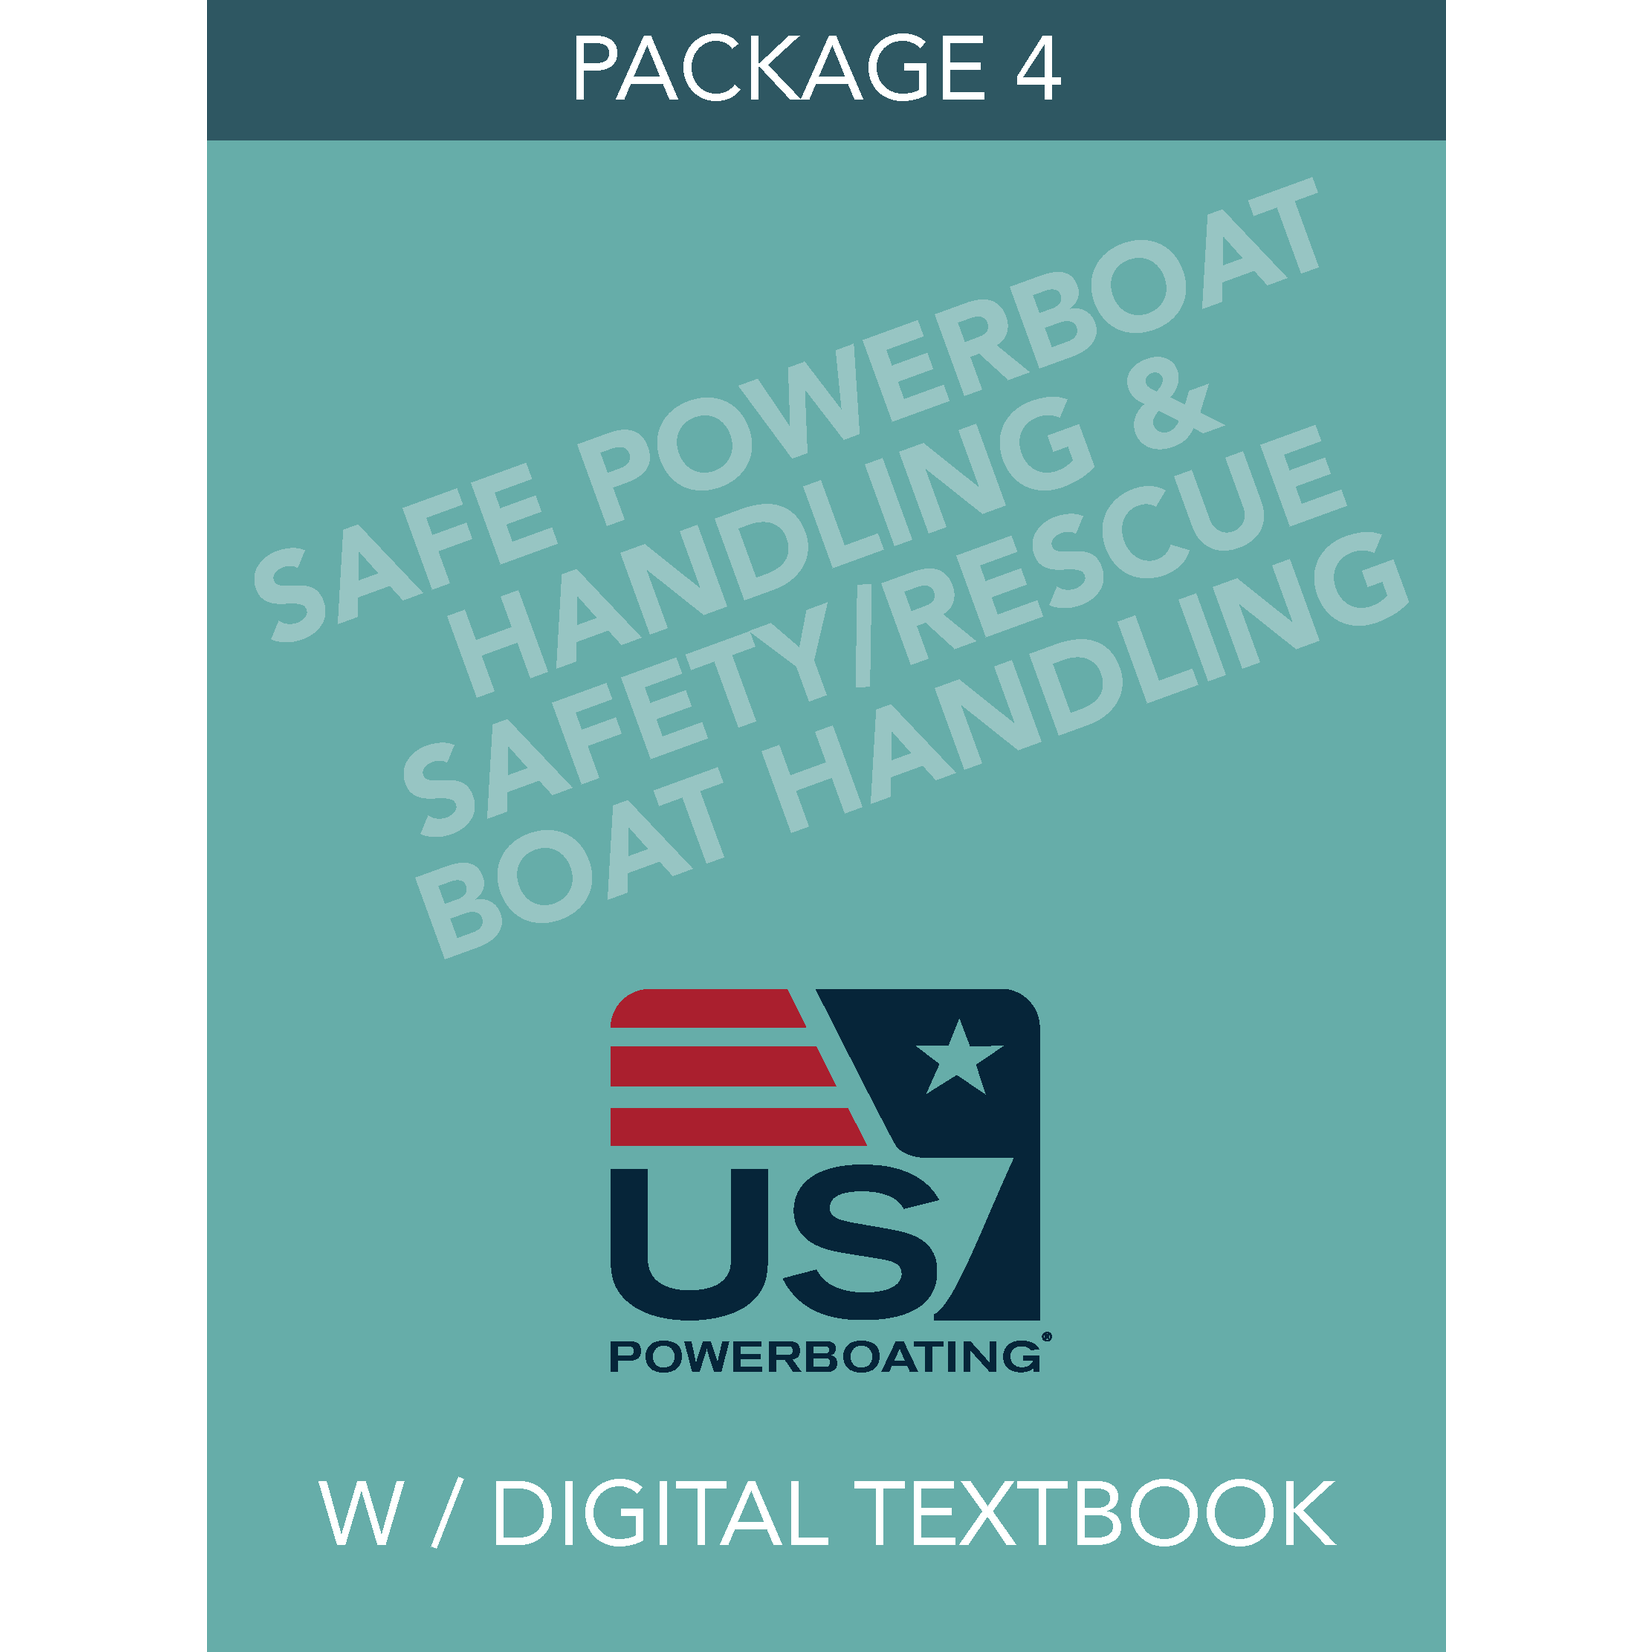 PACKAGE Package 4D – Safe Powerboat Handling & Safety, Rescue Boat Handling w/ Digital Textbook